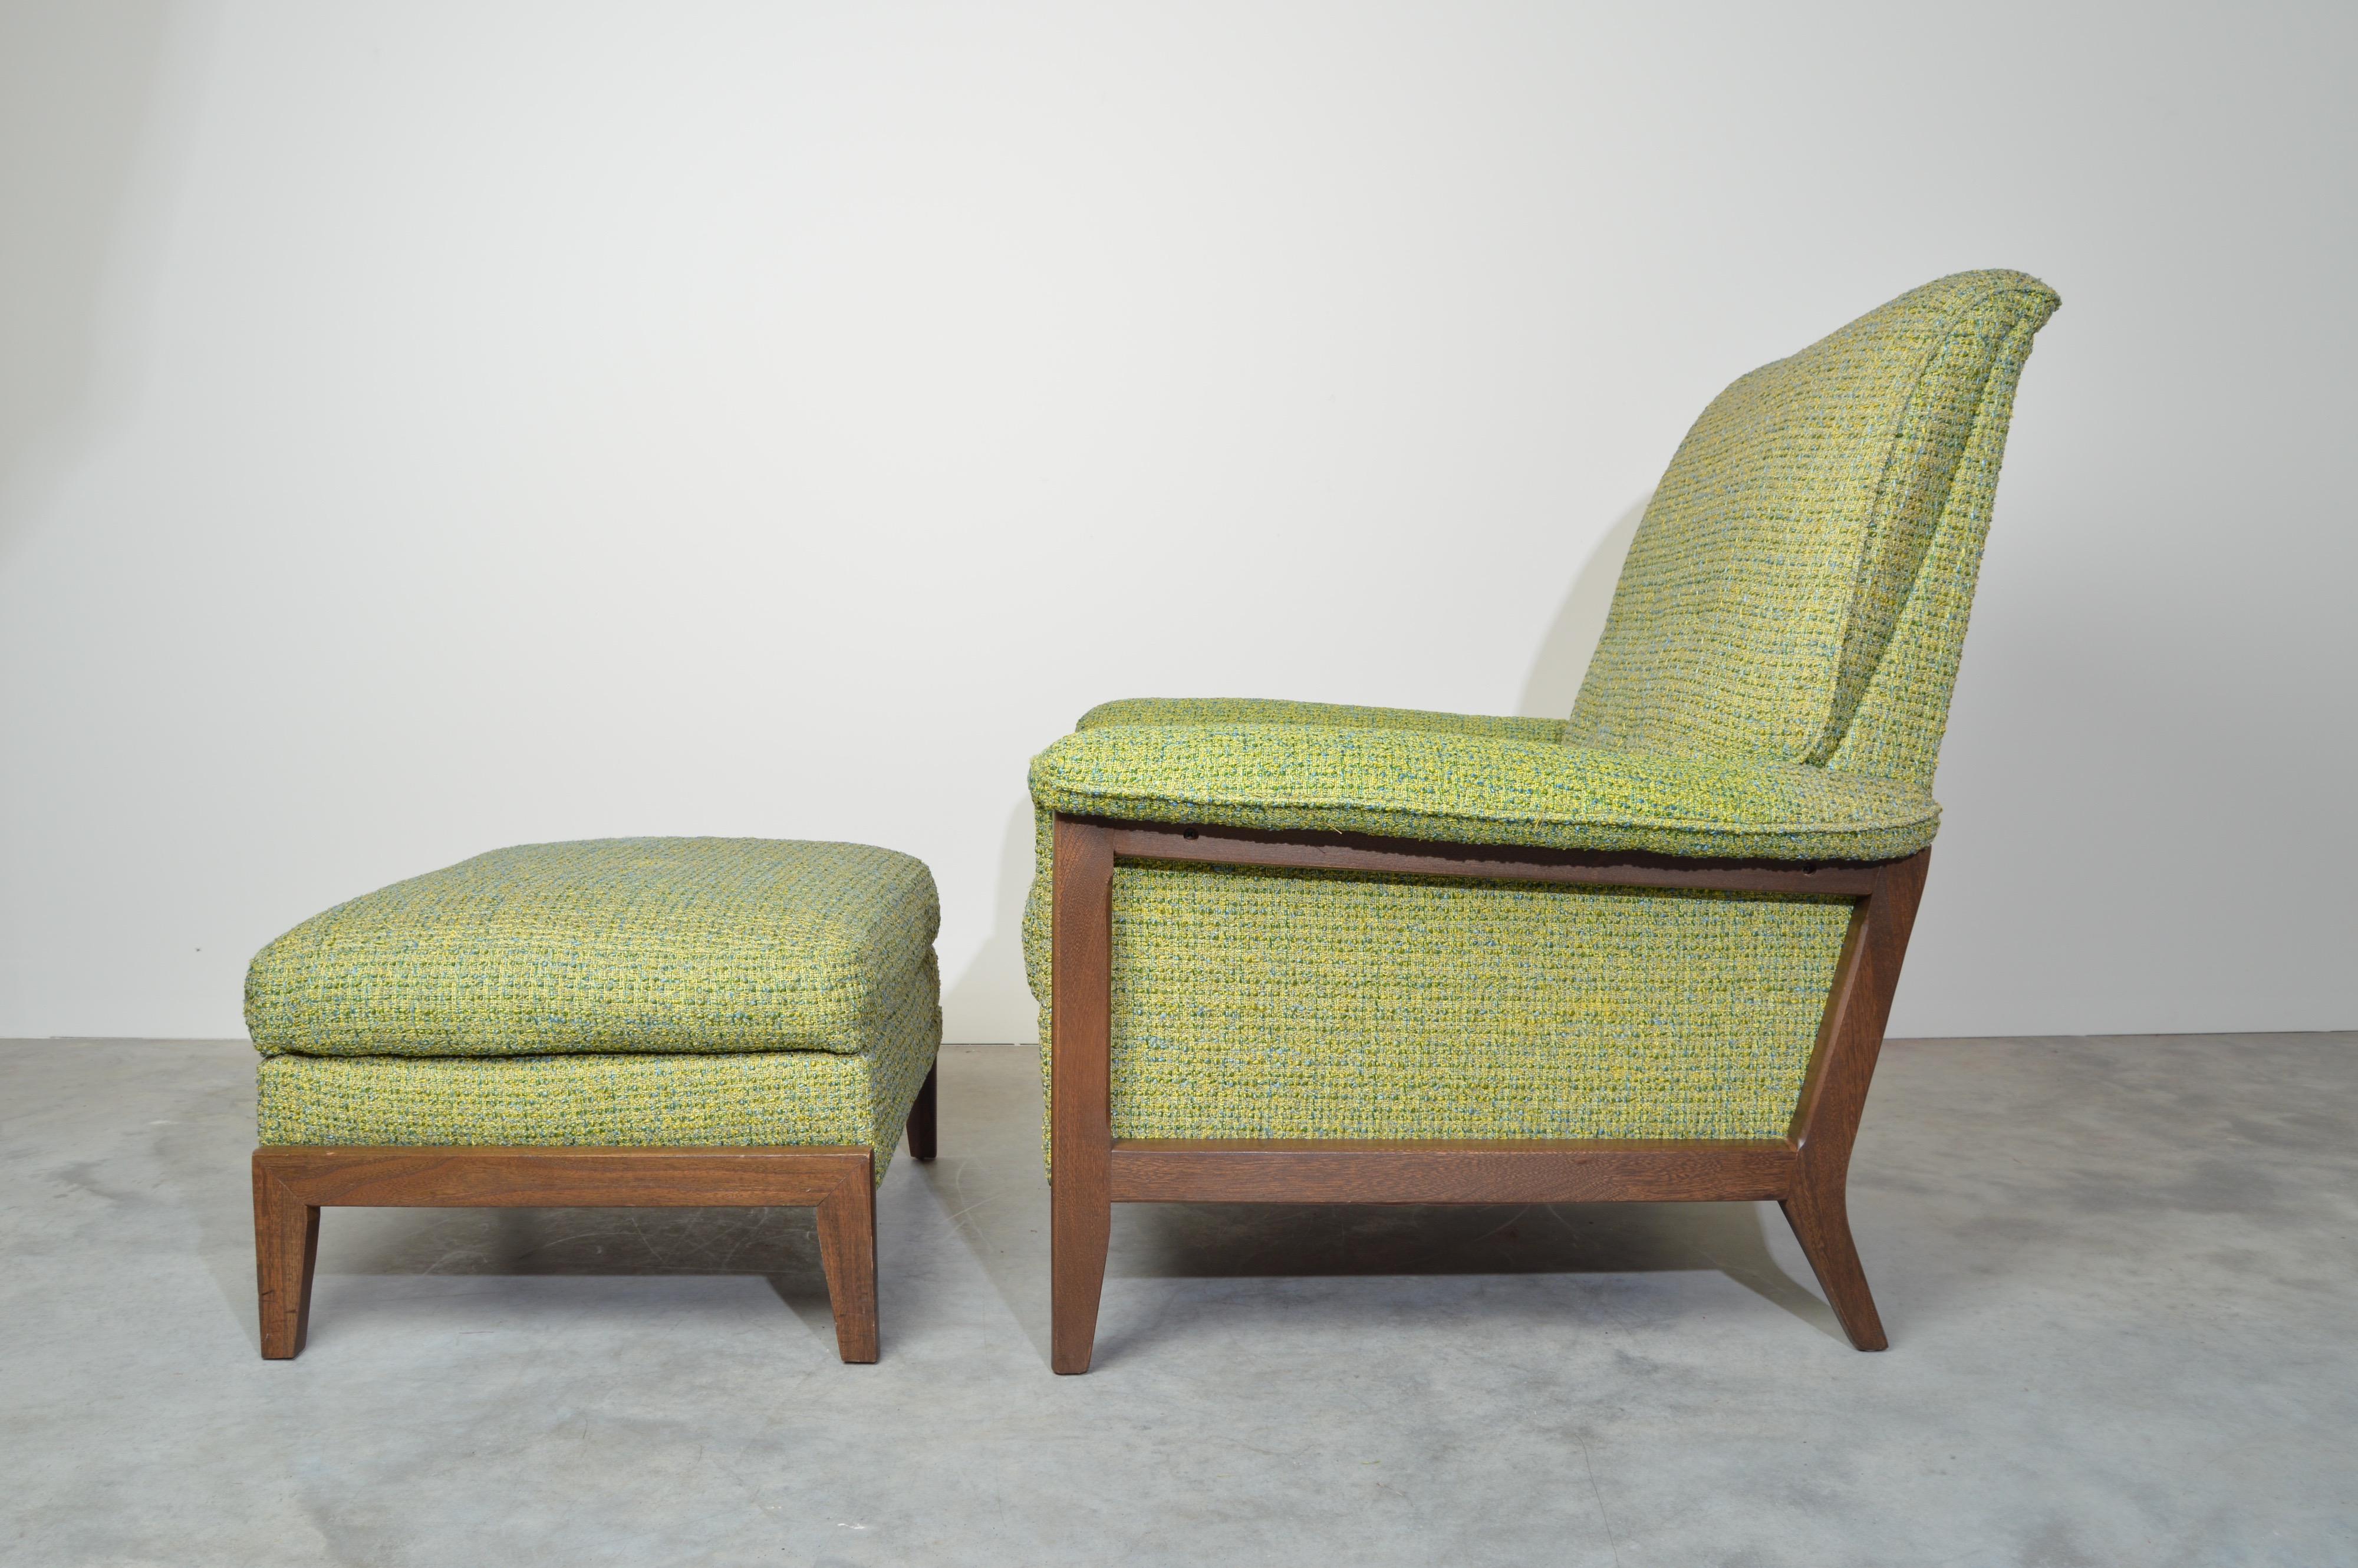 Lounge chair and ottoman set by Kroehler in the manner of Paul McCobb, circa 1960.
Beautifully maintained by it’s single owner having stunningly clean original fabric and kiln fired solid wooden frames. Very well built and extremely